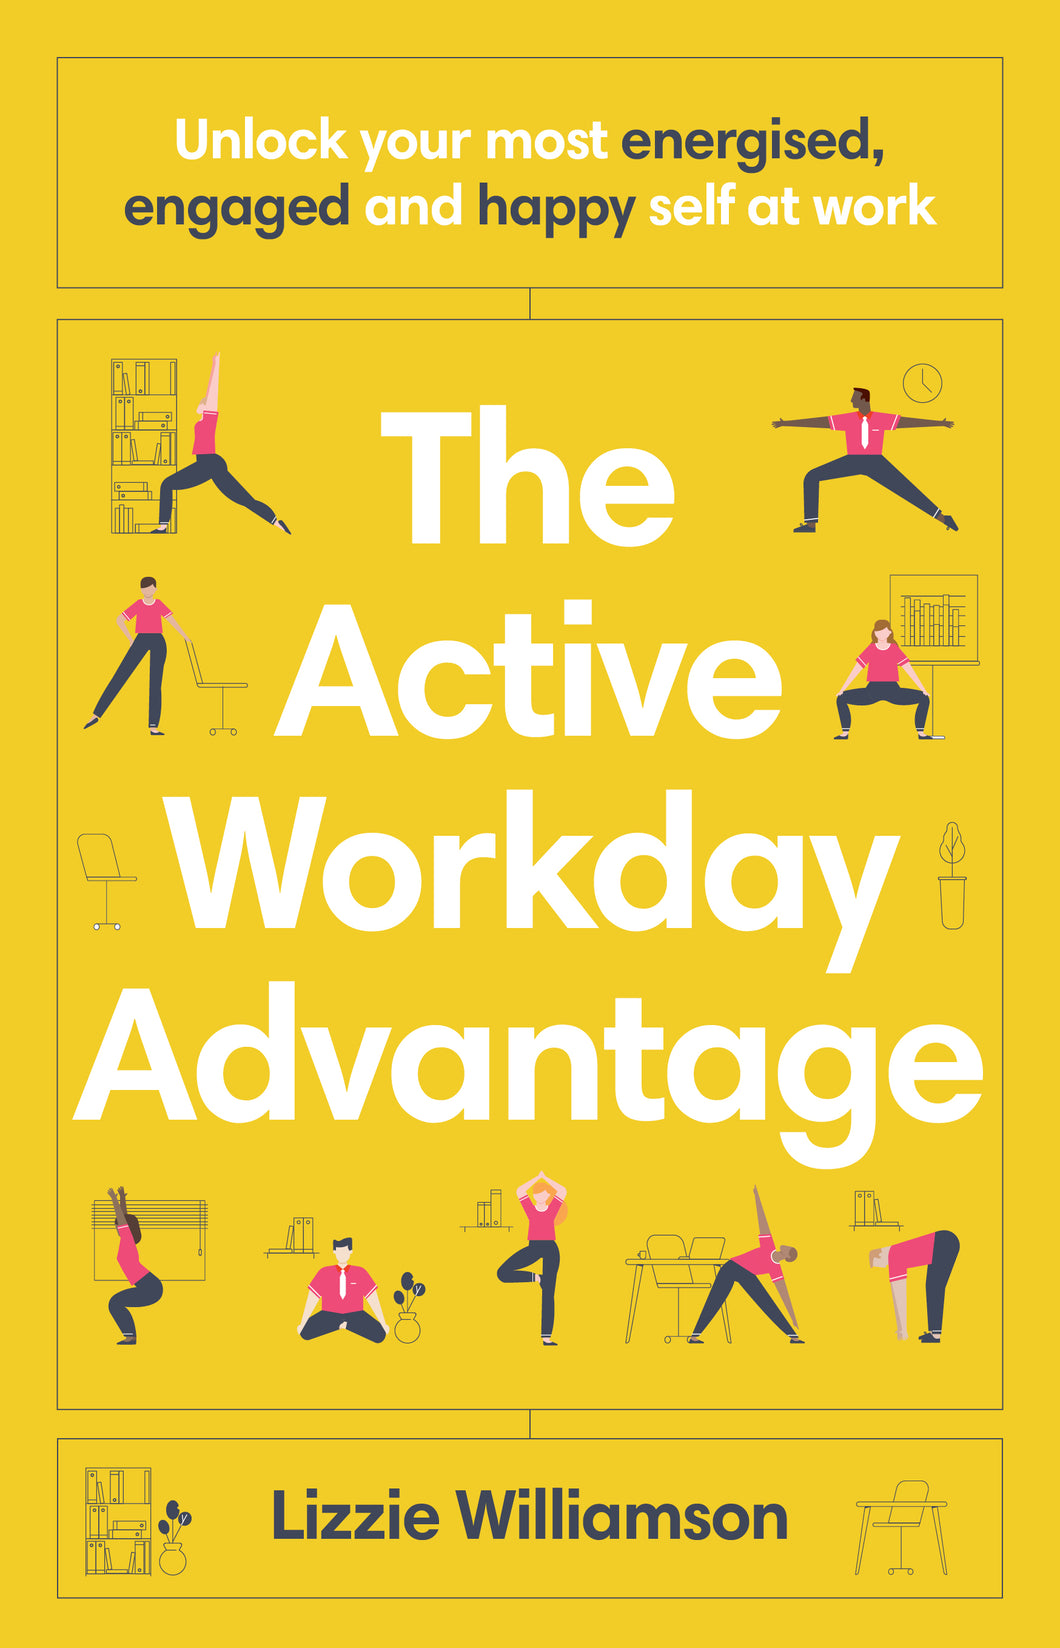 The Active Workday Advantage: Unlock your most energised, engaged and happy self at work <br><i><small> by Lizzie Williamson </i> </small>